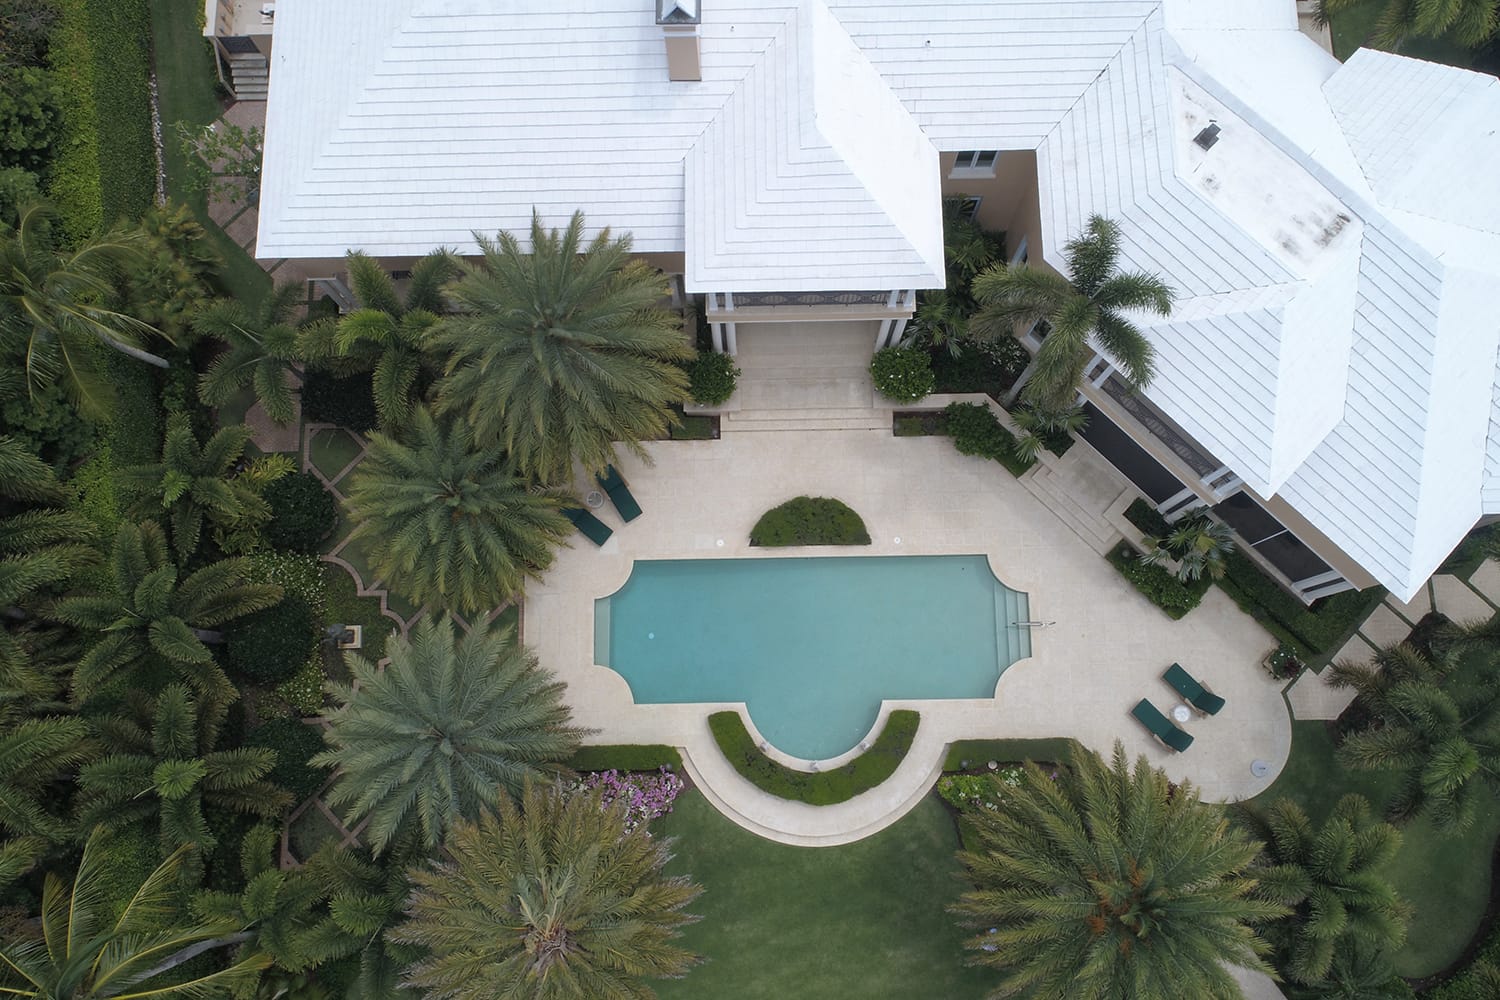 How to Shoot Superior Real Estate Drone Photography